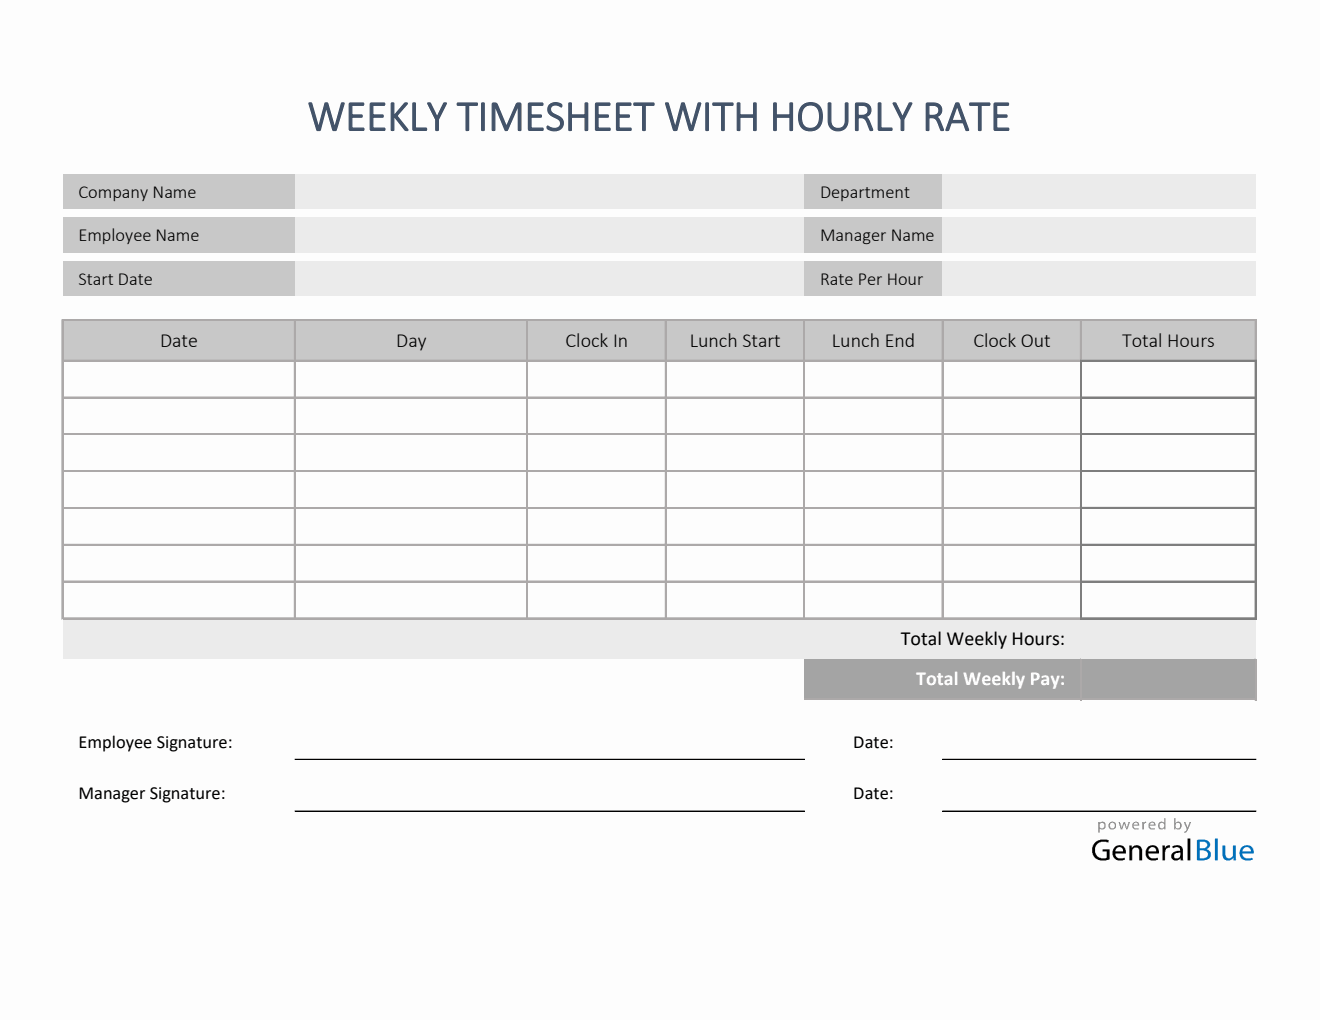 weekly-timesheet-with-hourly-rate-in-excel